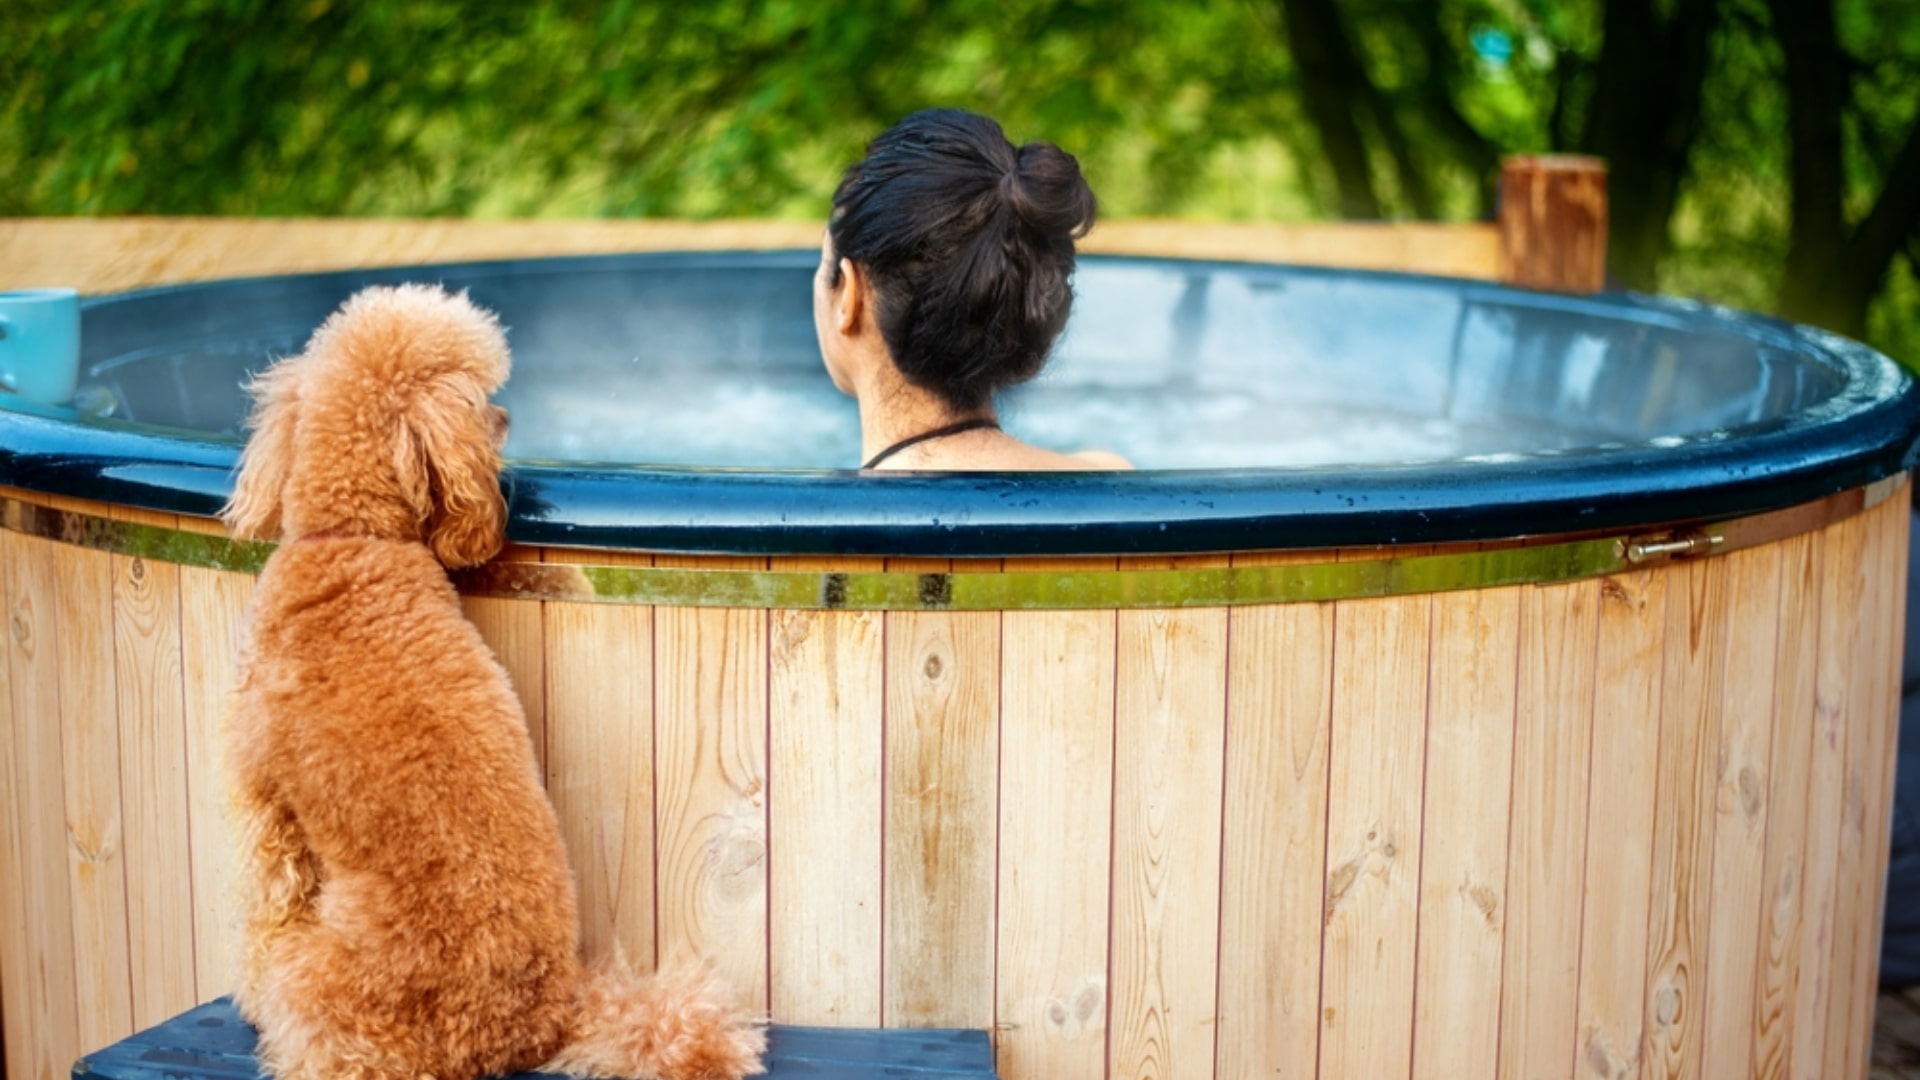 Top Reasons Why Hot Tub Ownership in Britain is on the Rise